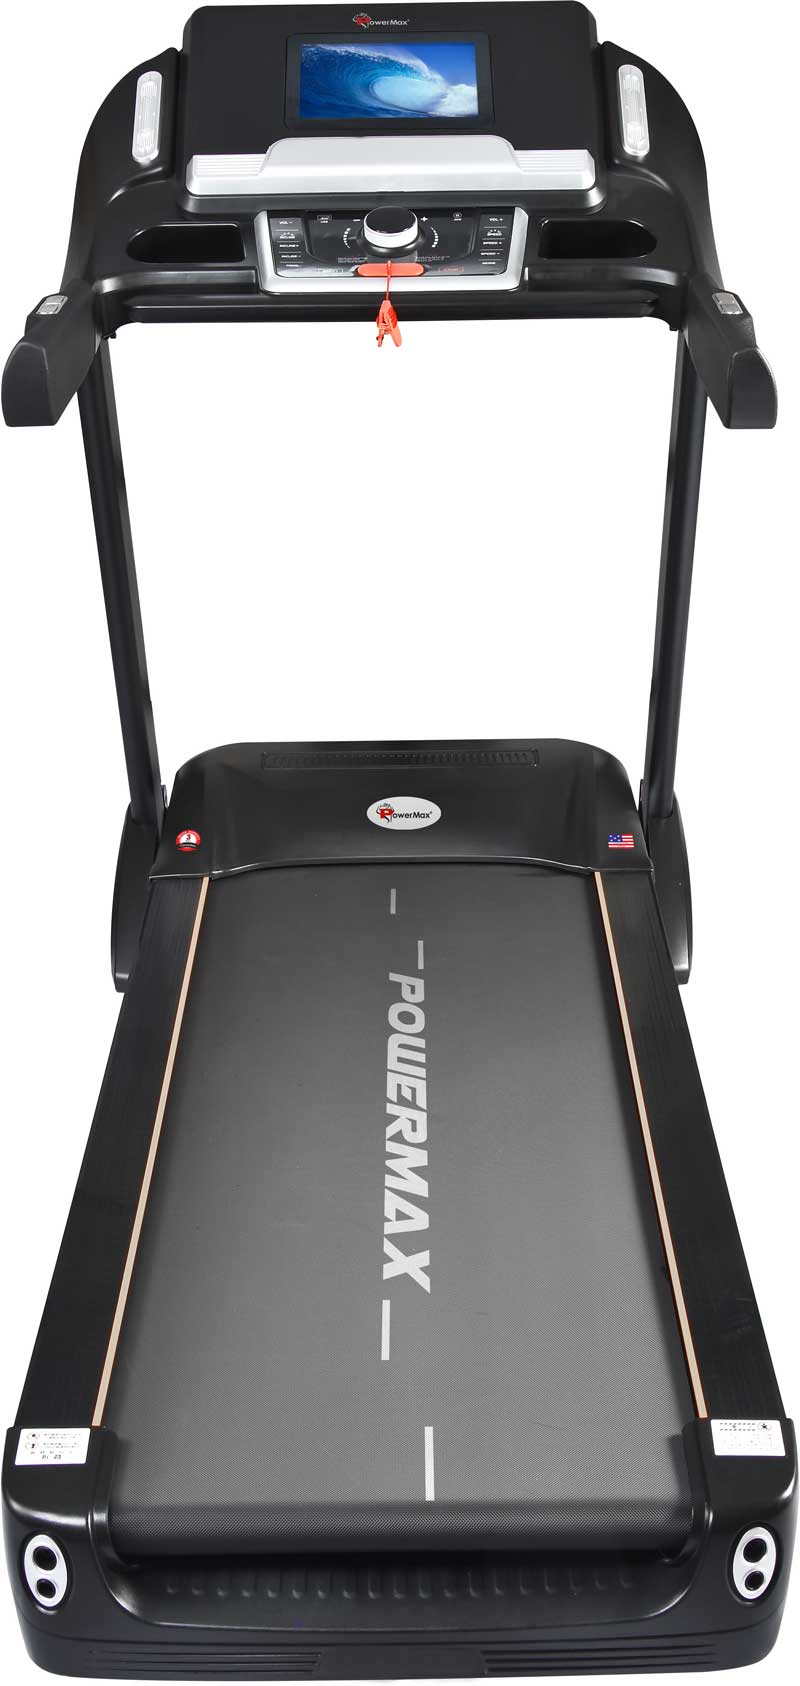 PowerMax Fitness New TAC-550 Semi-Commercial Motorized Treadmill launched in 2022 